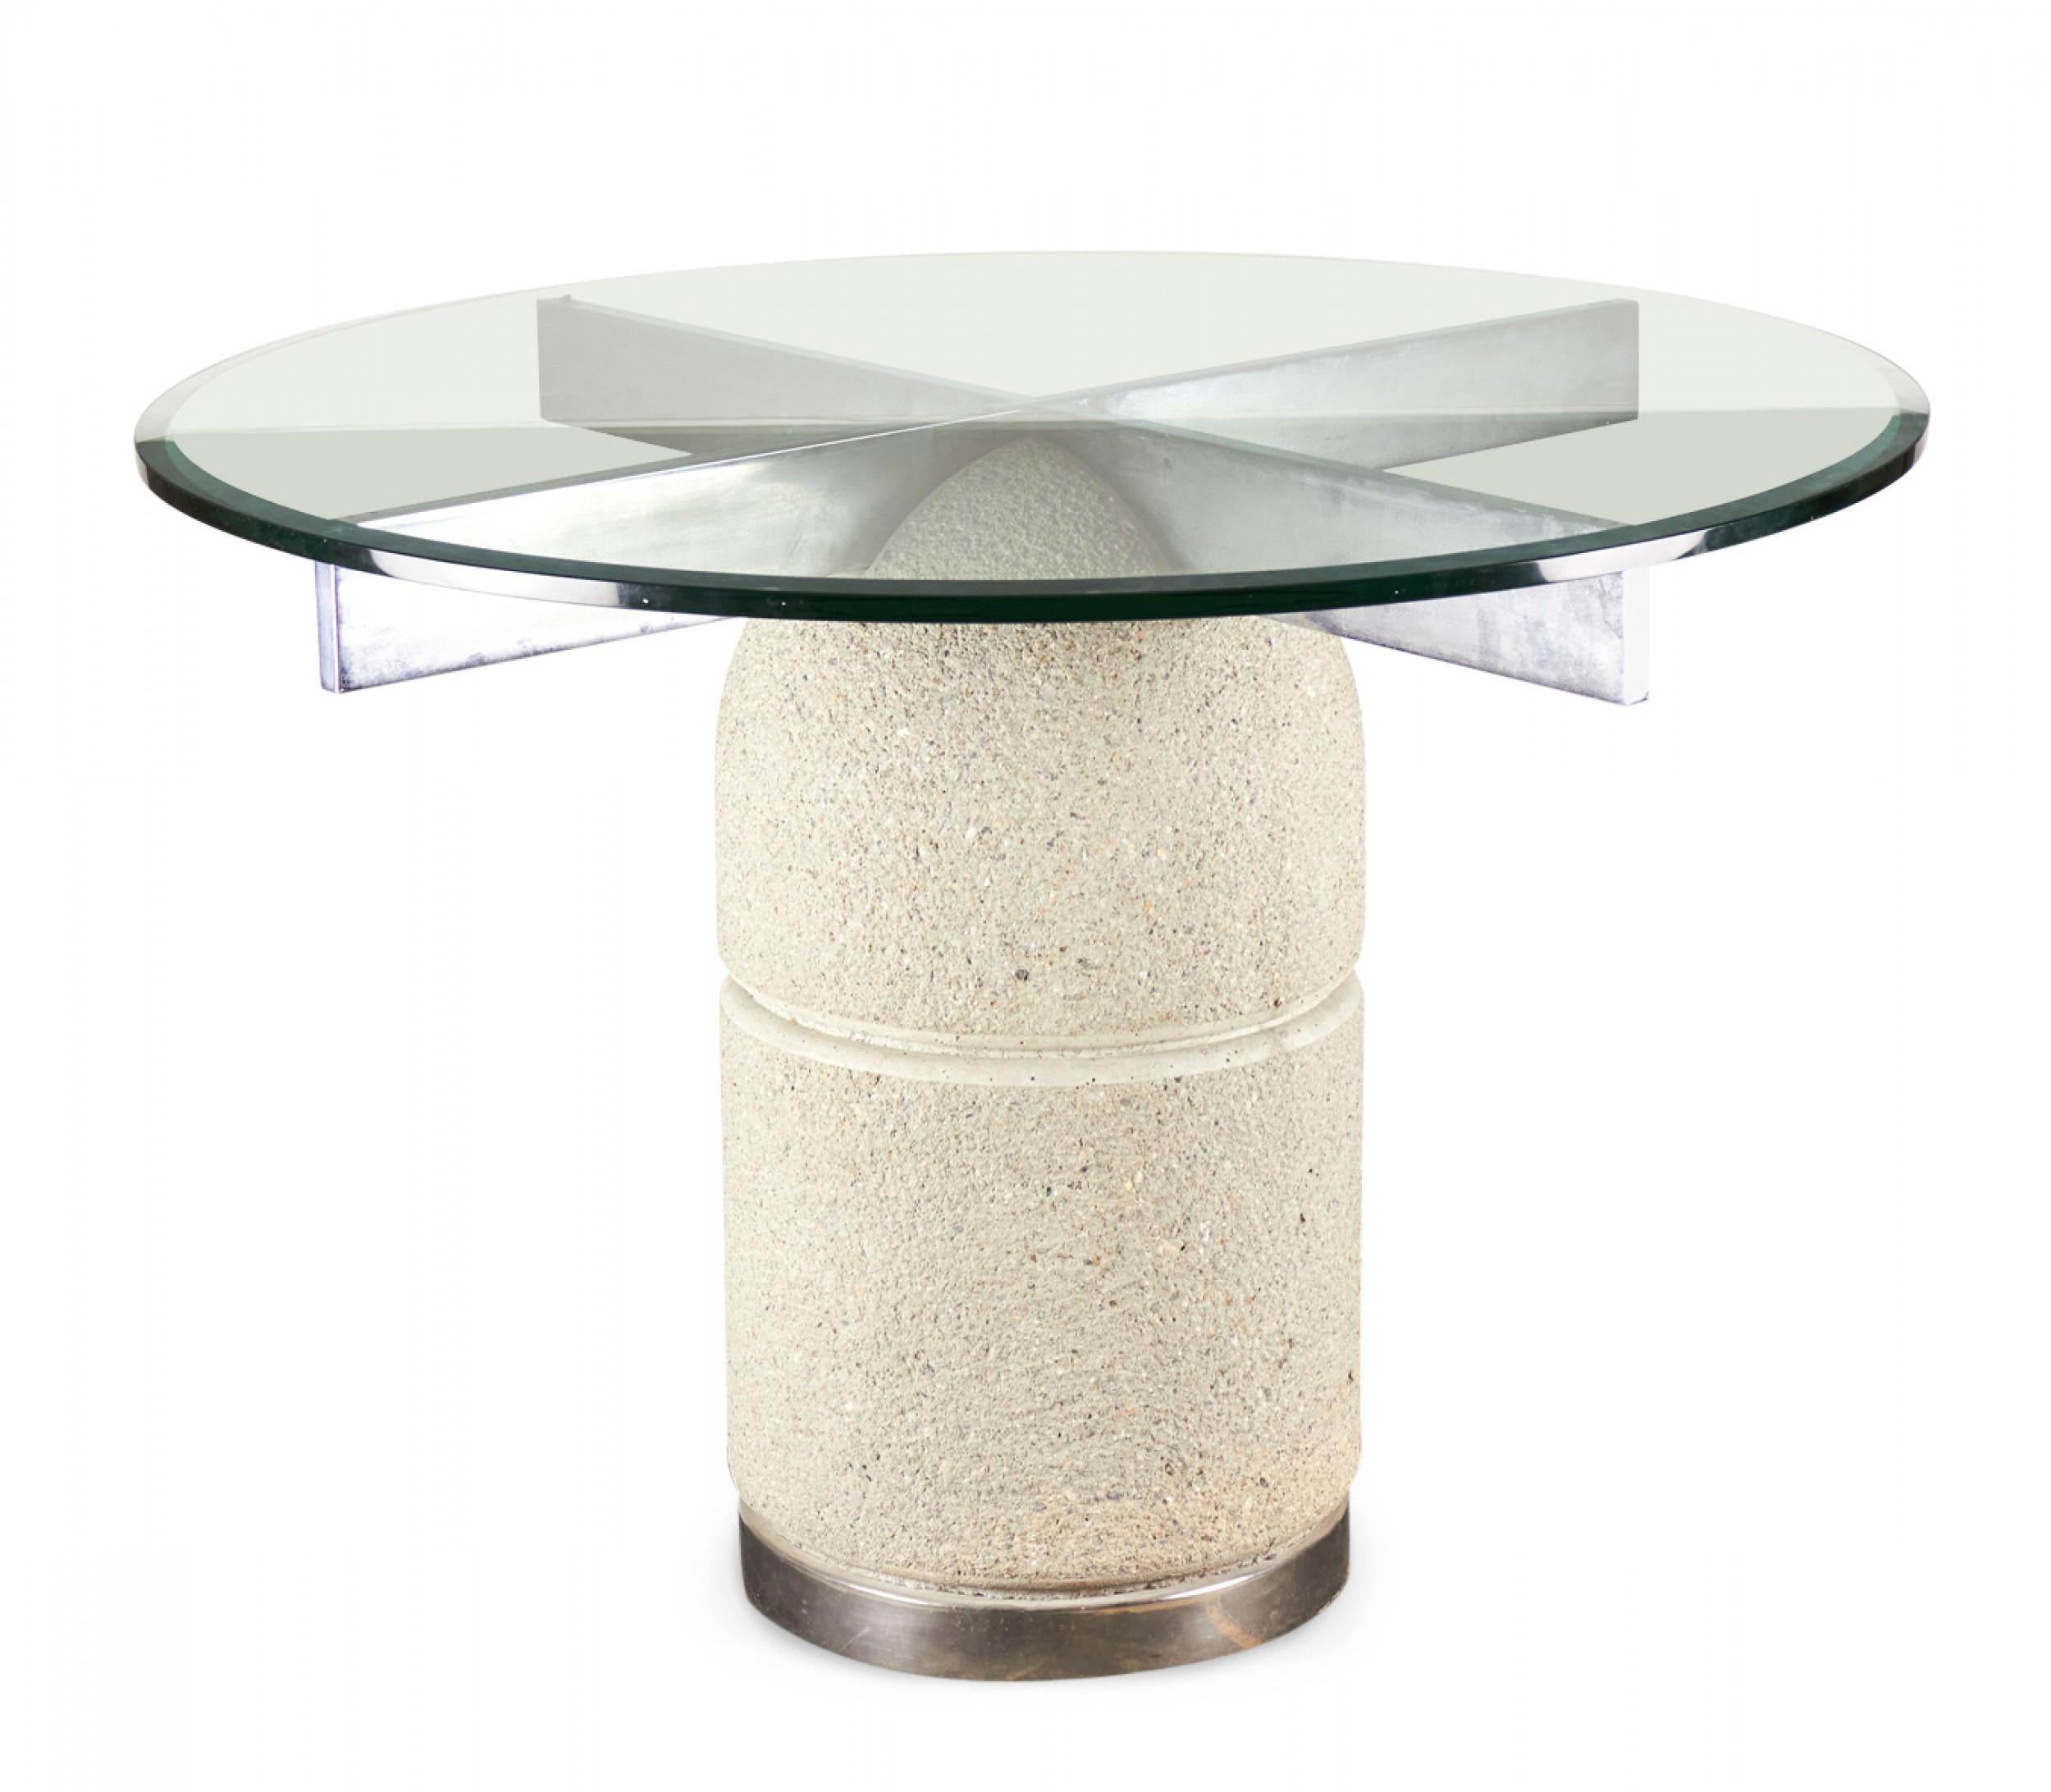 Italian Mid-Century (circa 1979) 'Paracarro' circular dining table with a textured concrete plinth base with an inset polished chrome support beneath a circular clear plate glass top. (GIOVANNI OFFREDI FOR SAPORITI).